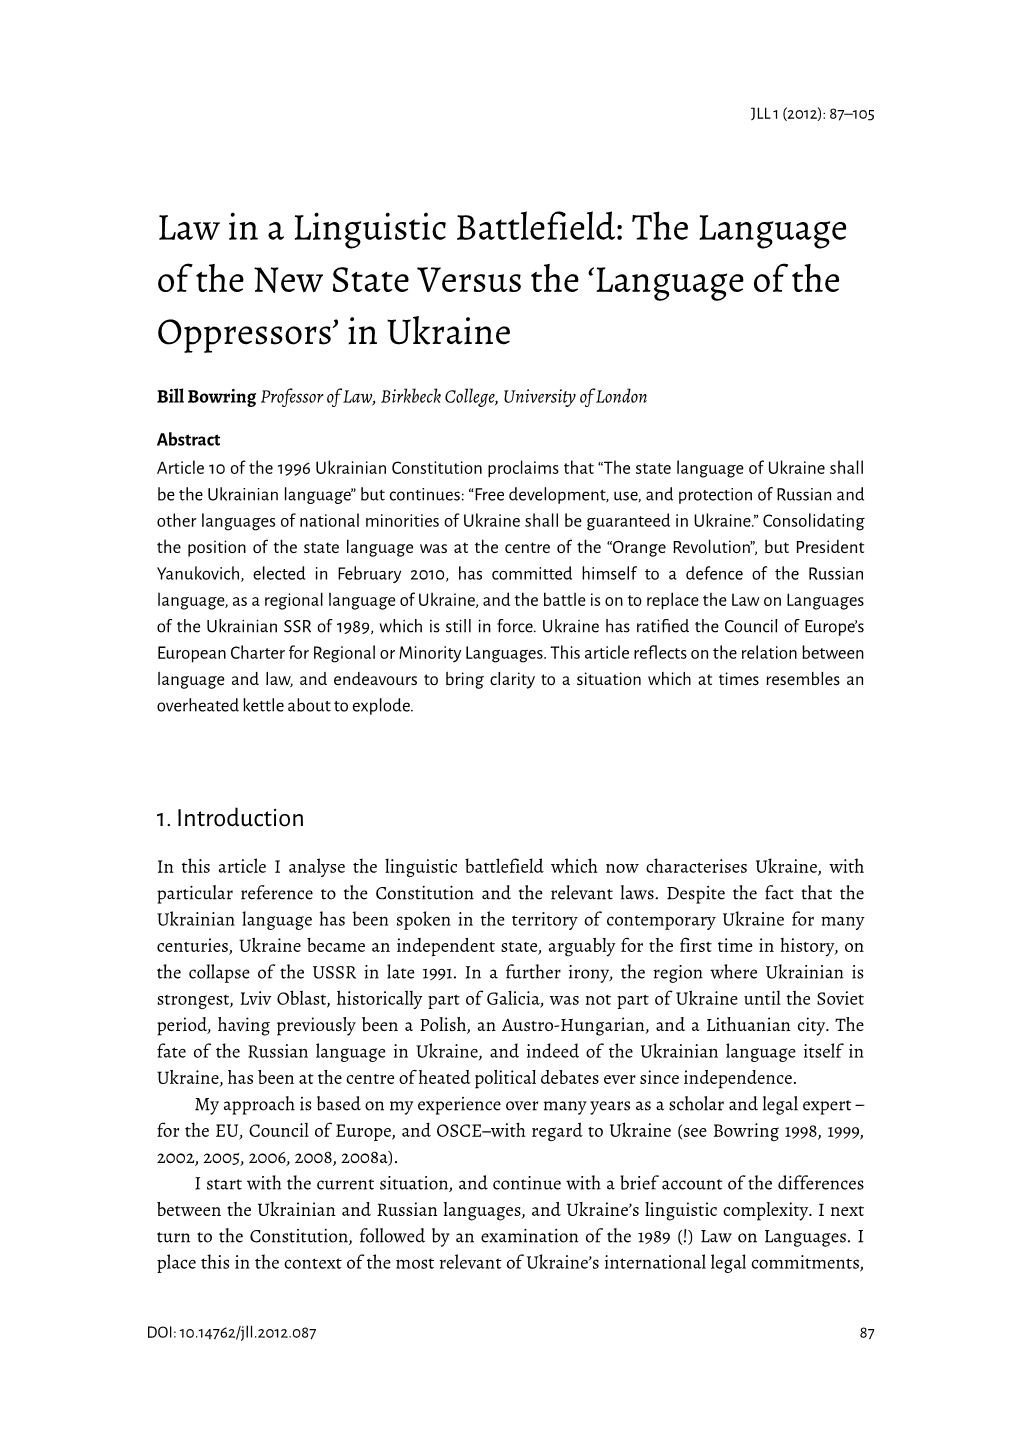 Law in a Linguistic Battlefield: the Language of the New State Versus the ‘Language of the Oppressors’ in Ukraine